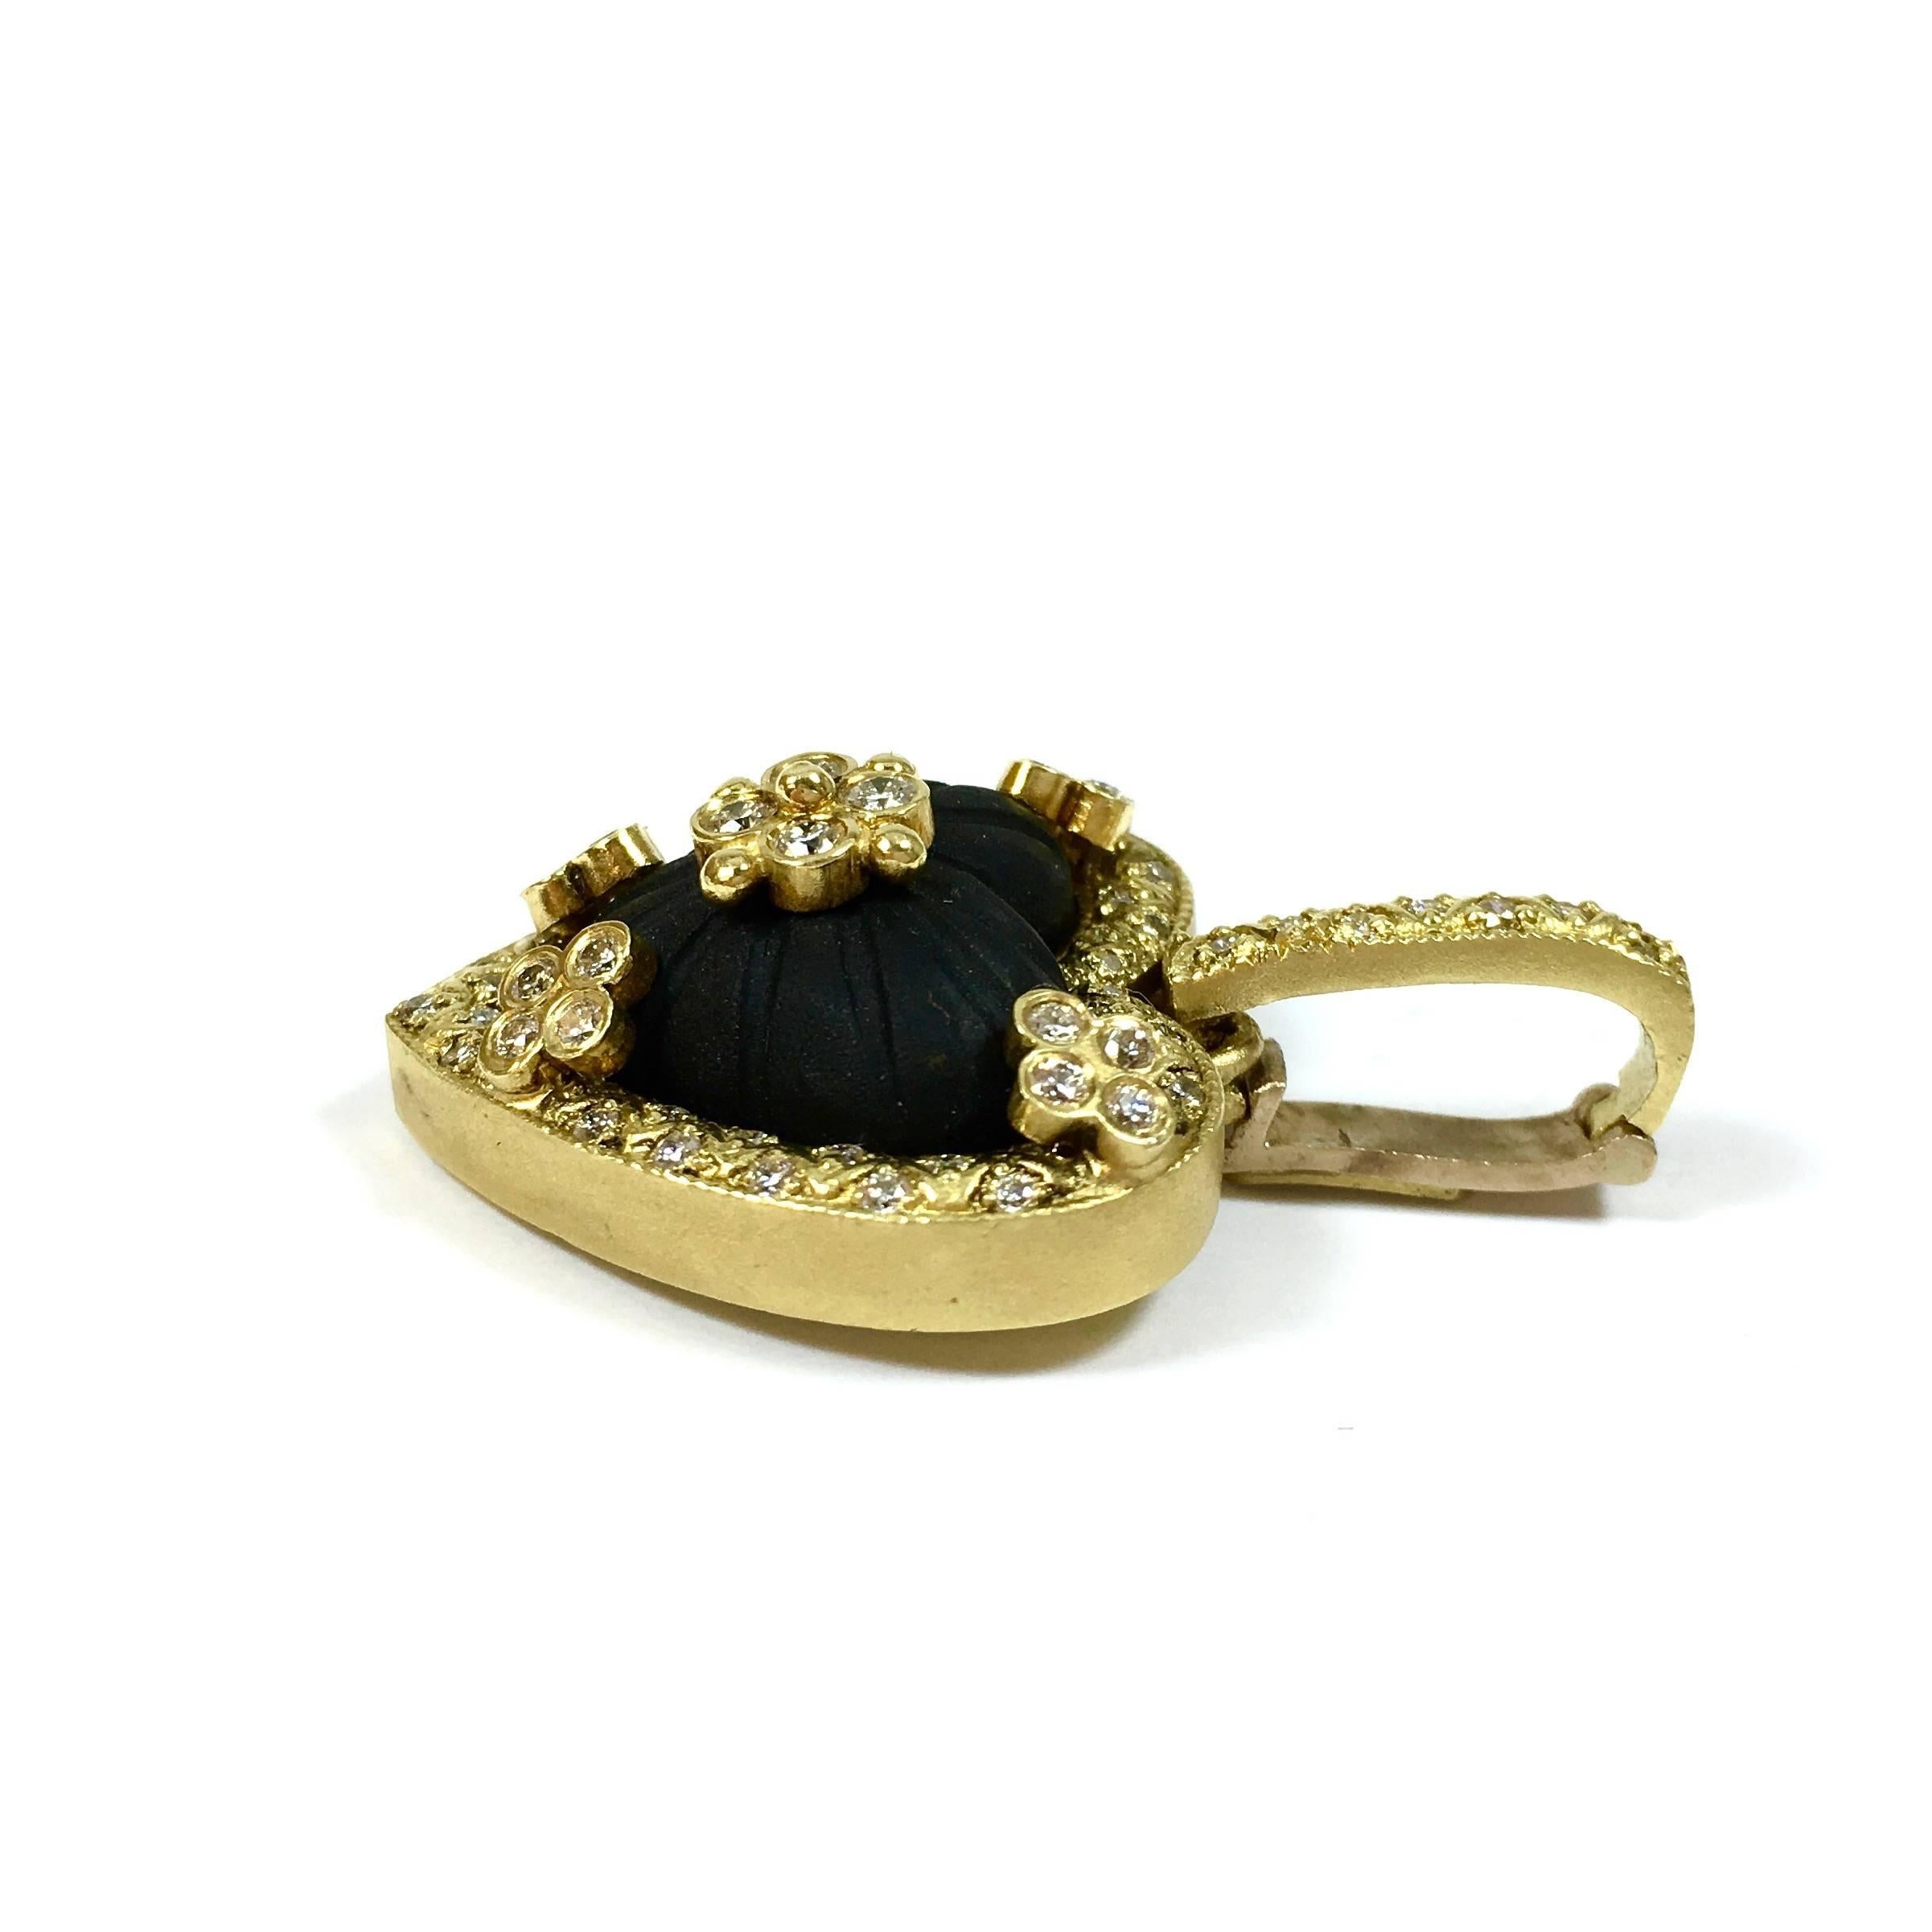 Gorgeous 18K yellow gold pendant enhancer, set with a special cut, heart shaped frosted black Onyx in the center, encrusted with 1.00 carats of diamonds. Color: G, Clarity: VS
The pendant measures 1.5 inches in length (including bail) and 1.1